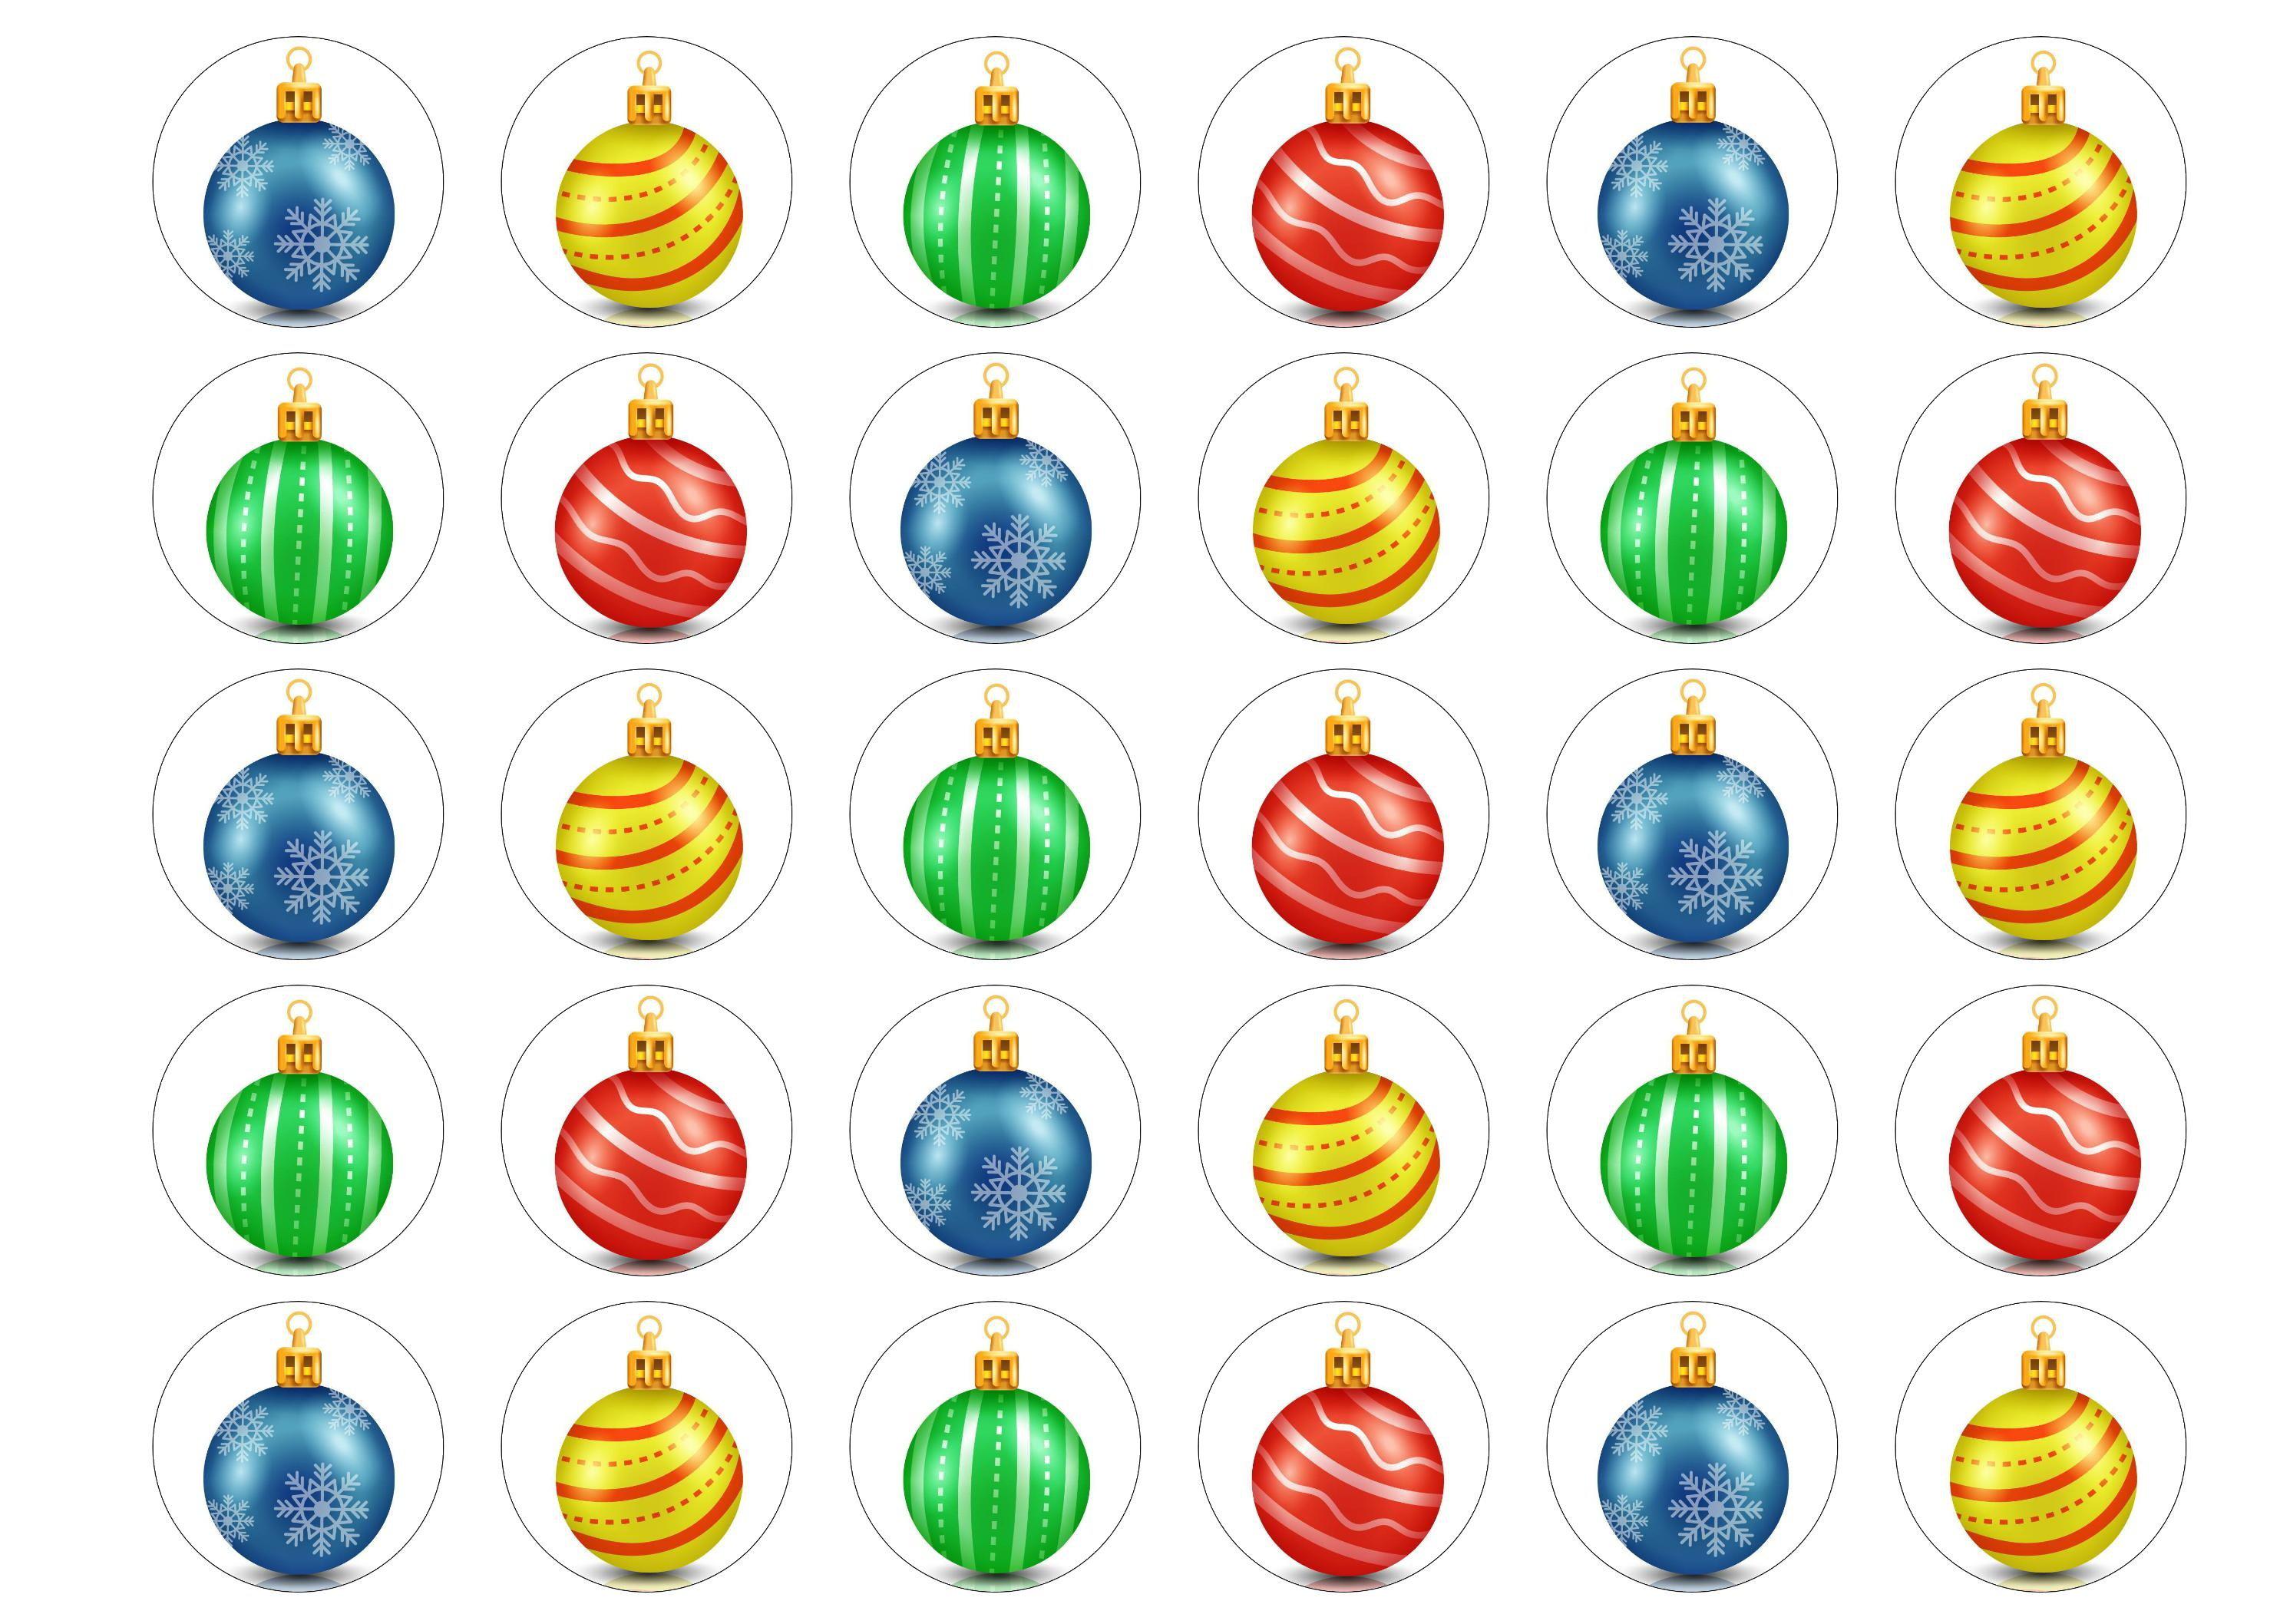 30 edible printed cupcake toppers with multicoloured Christmas bauble designs